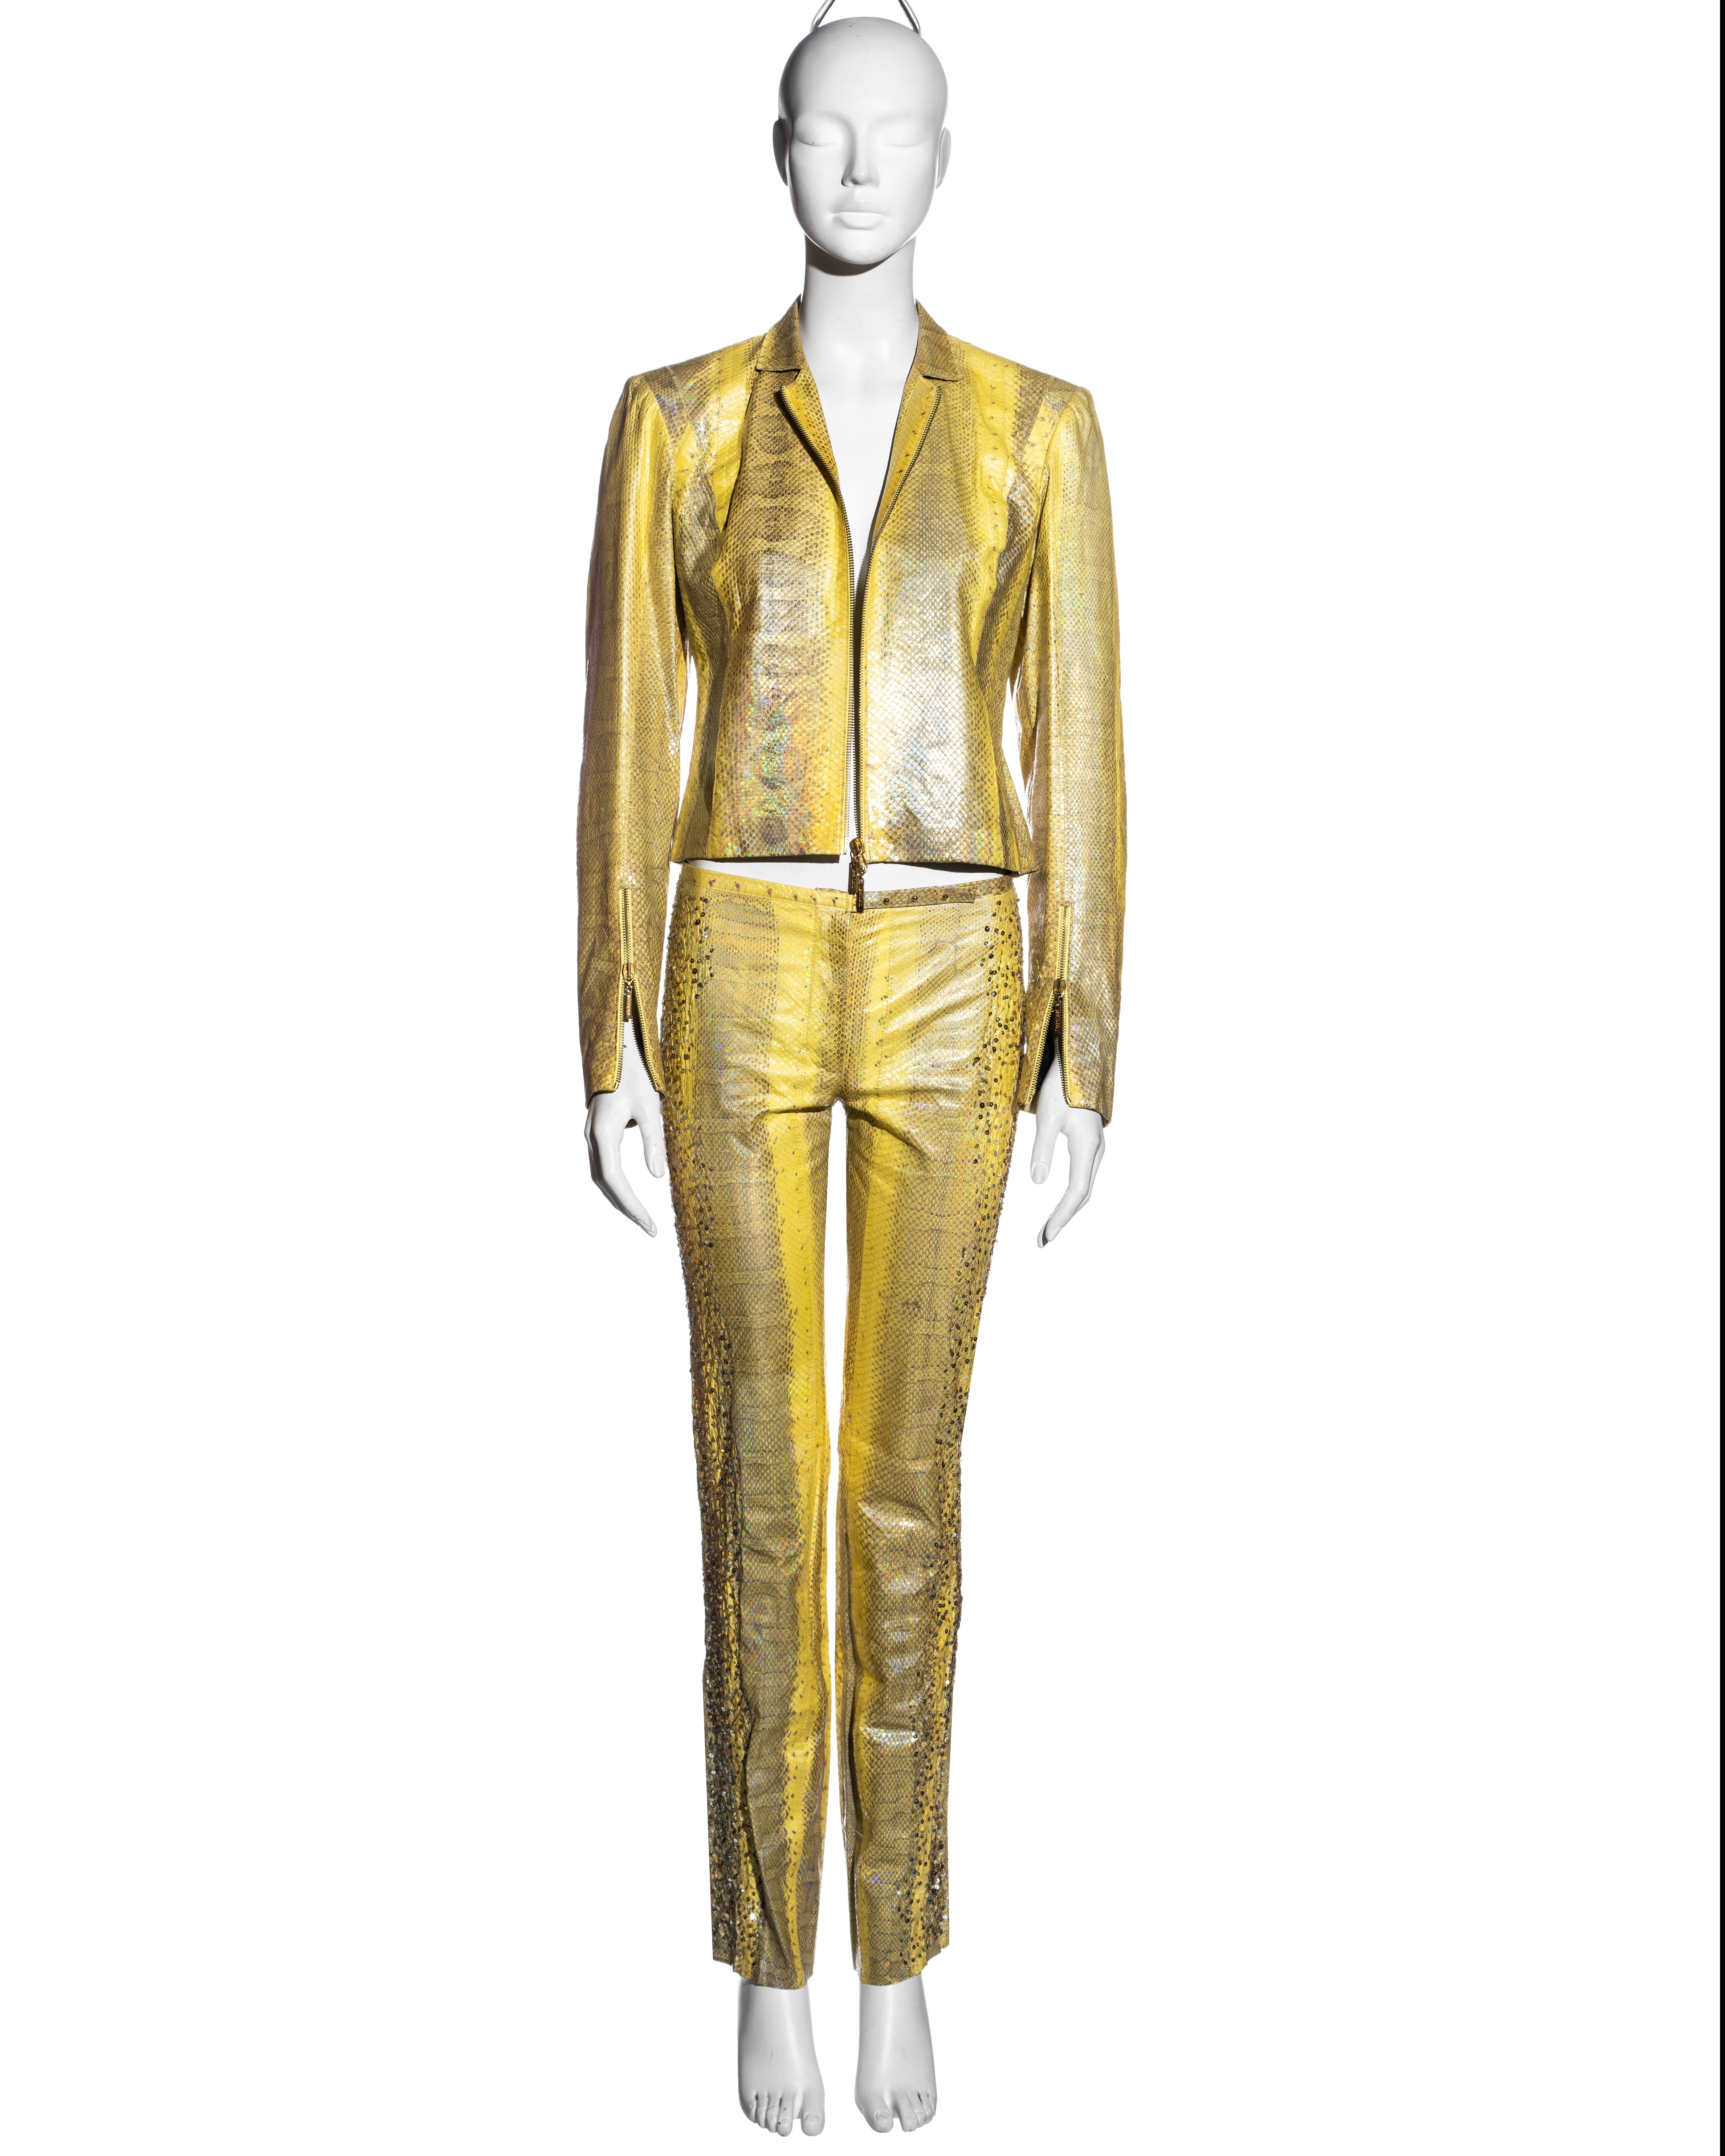 ▪ Roberto Cavalli yellow iridescent snakeskin pant suit
▪ Fitted jacket with double-ended gold zipper
▪ Zip-up cuffs 
▪ Matching slim-fit snakeskin pants with sequin embroidery 
▪ Jacket: Small, Pants: Extra Small
▪ Spring-Summer 2001